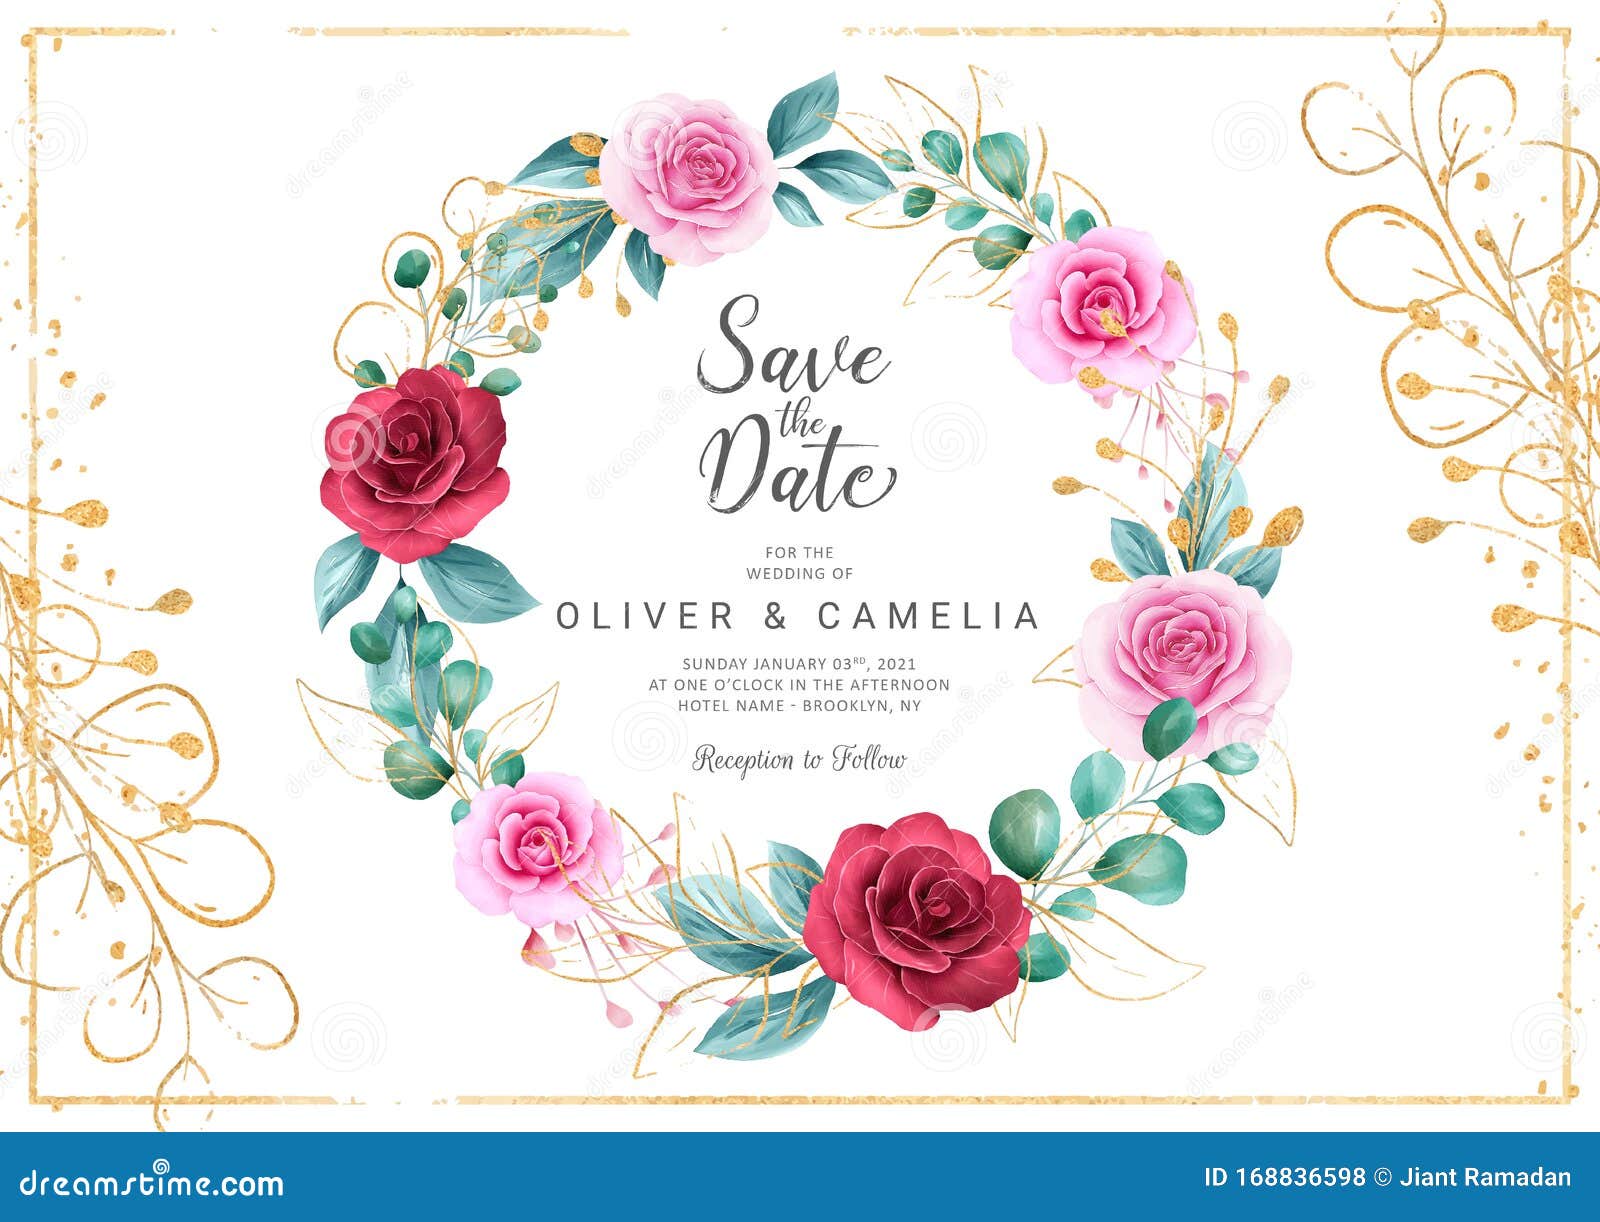 WEDDING INVITATION Floral Gold Wreath Save the Date Printable